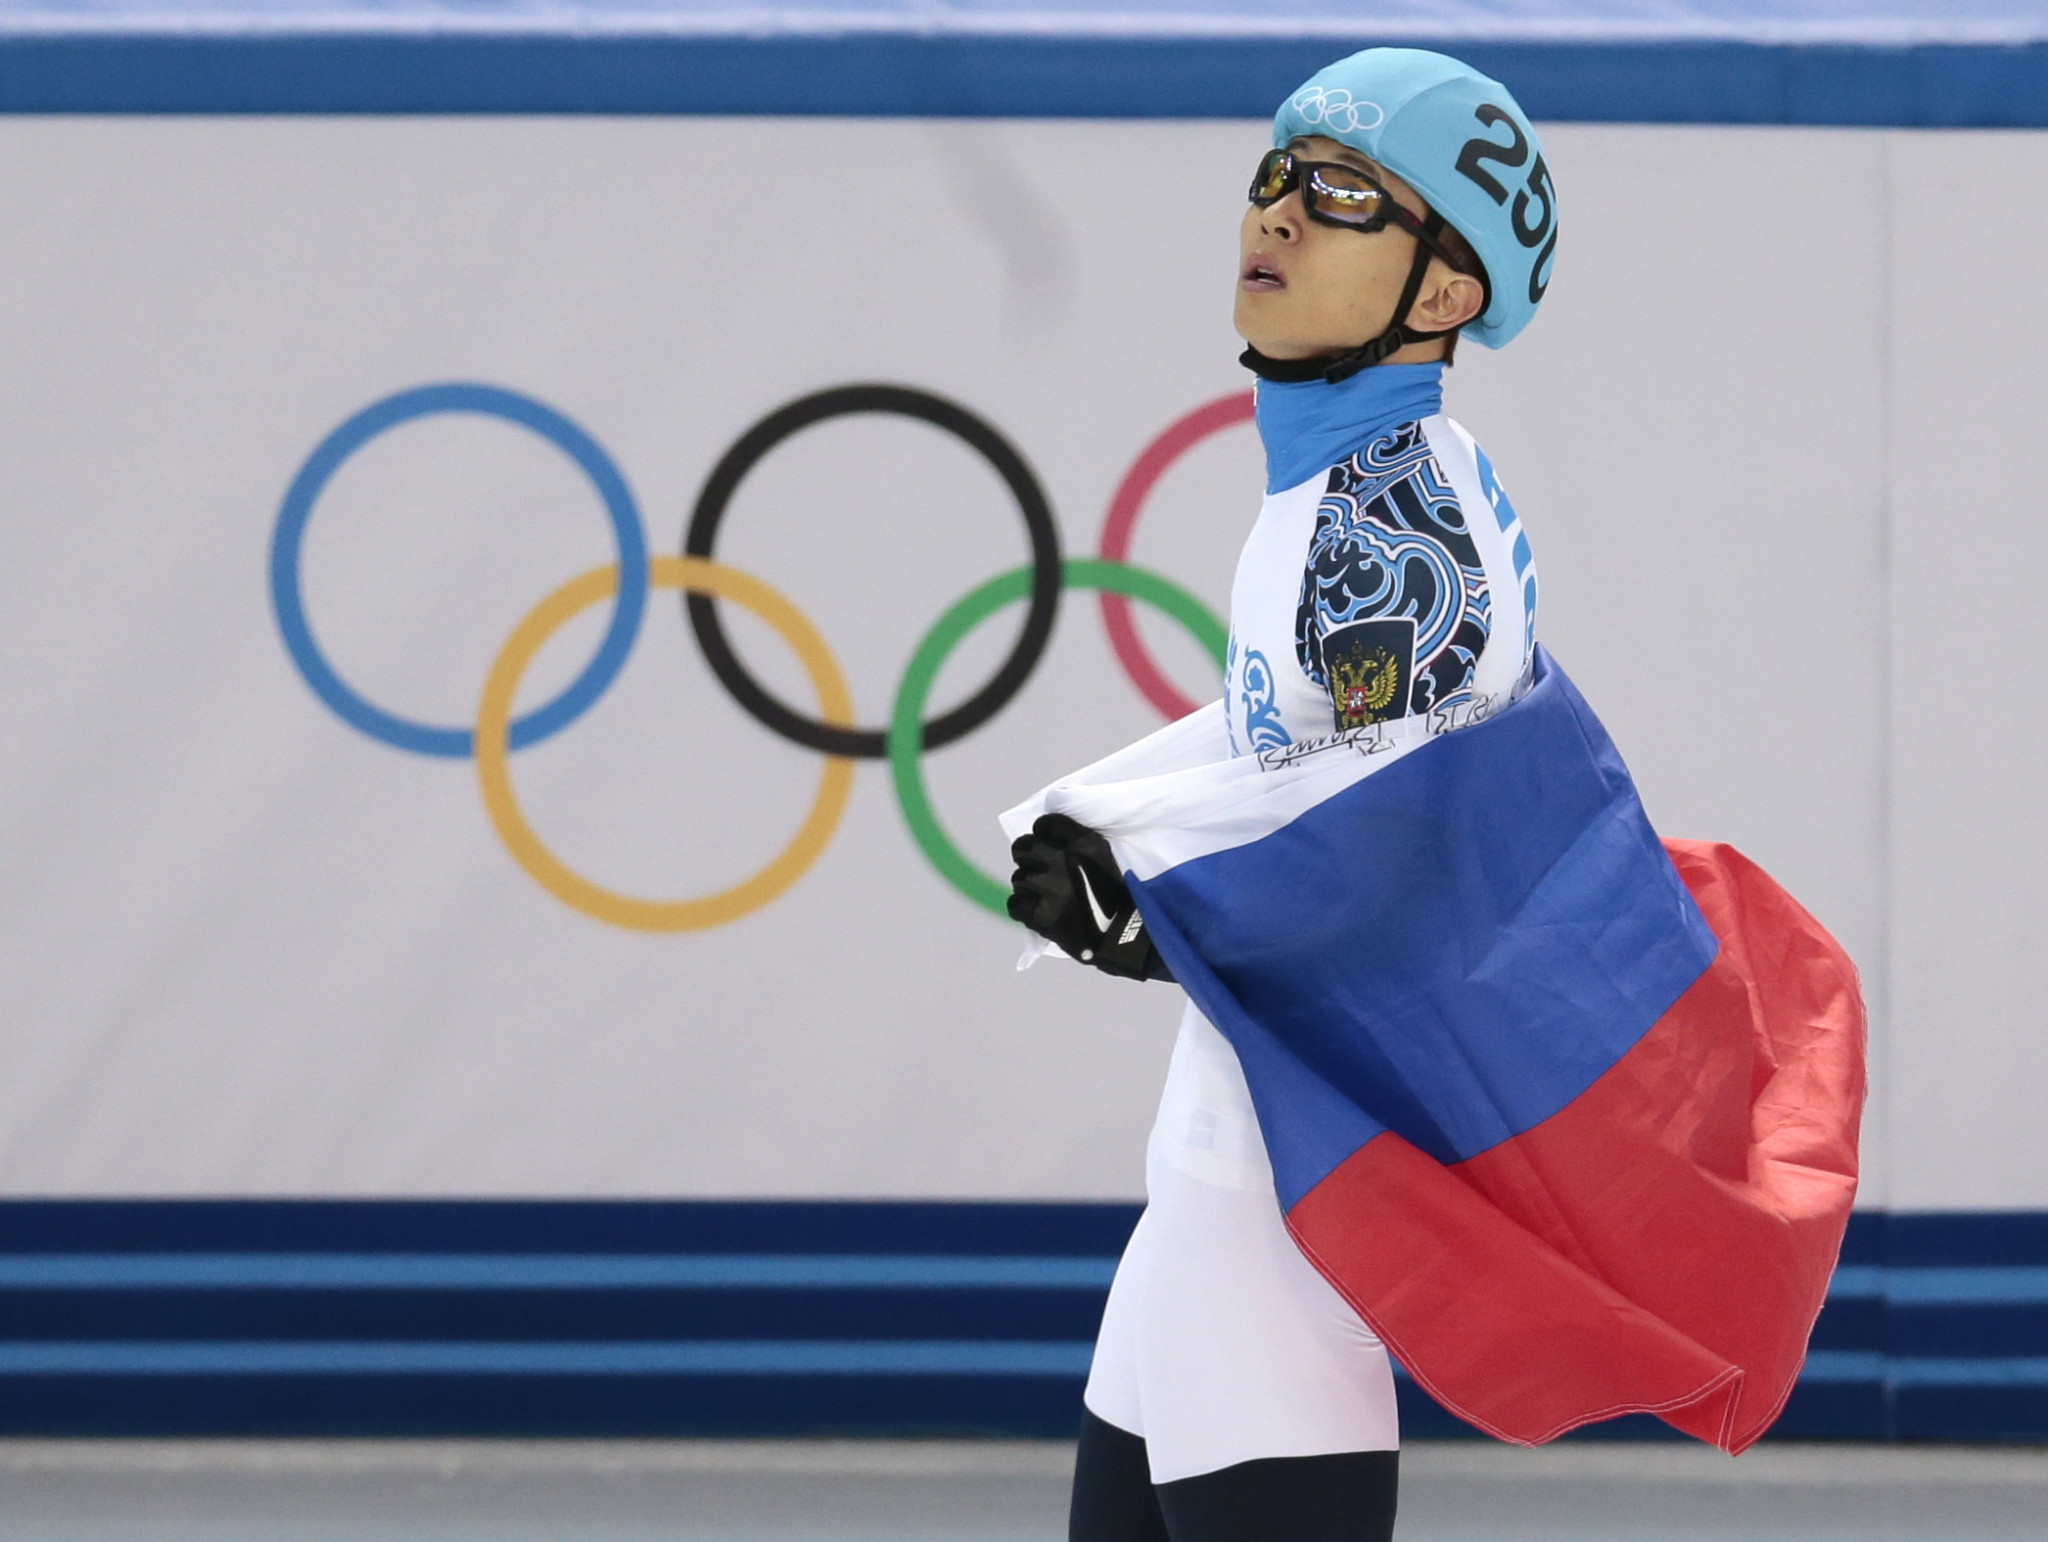 Victor Ahn is among 32 Russians appealing to CAS after they were banned from Pyeongchang 2018 ©Getty Images